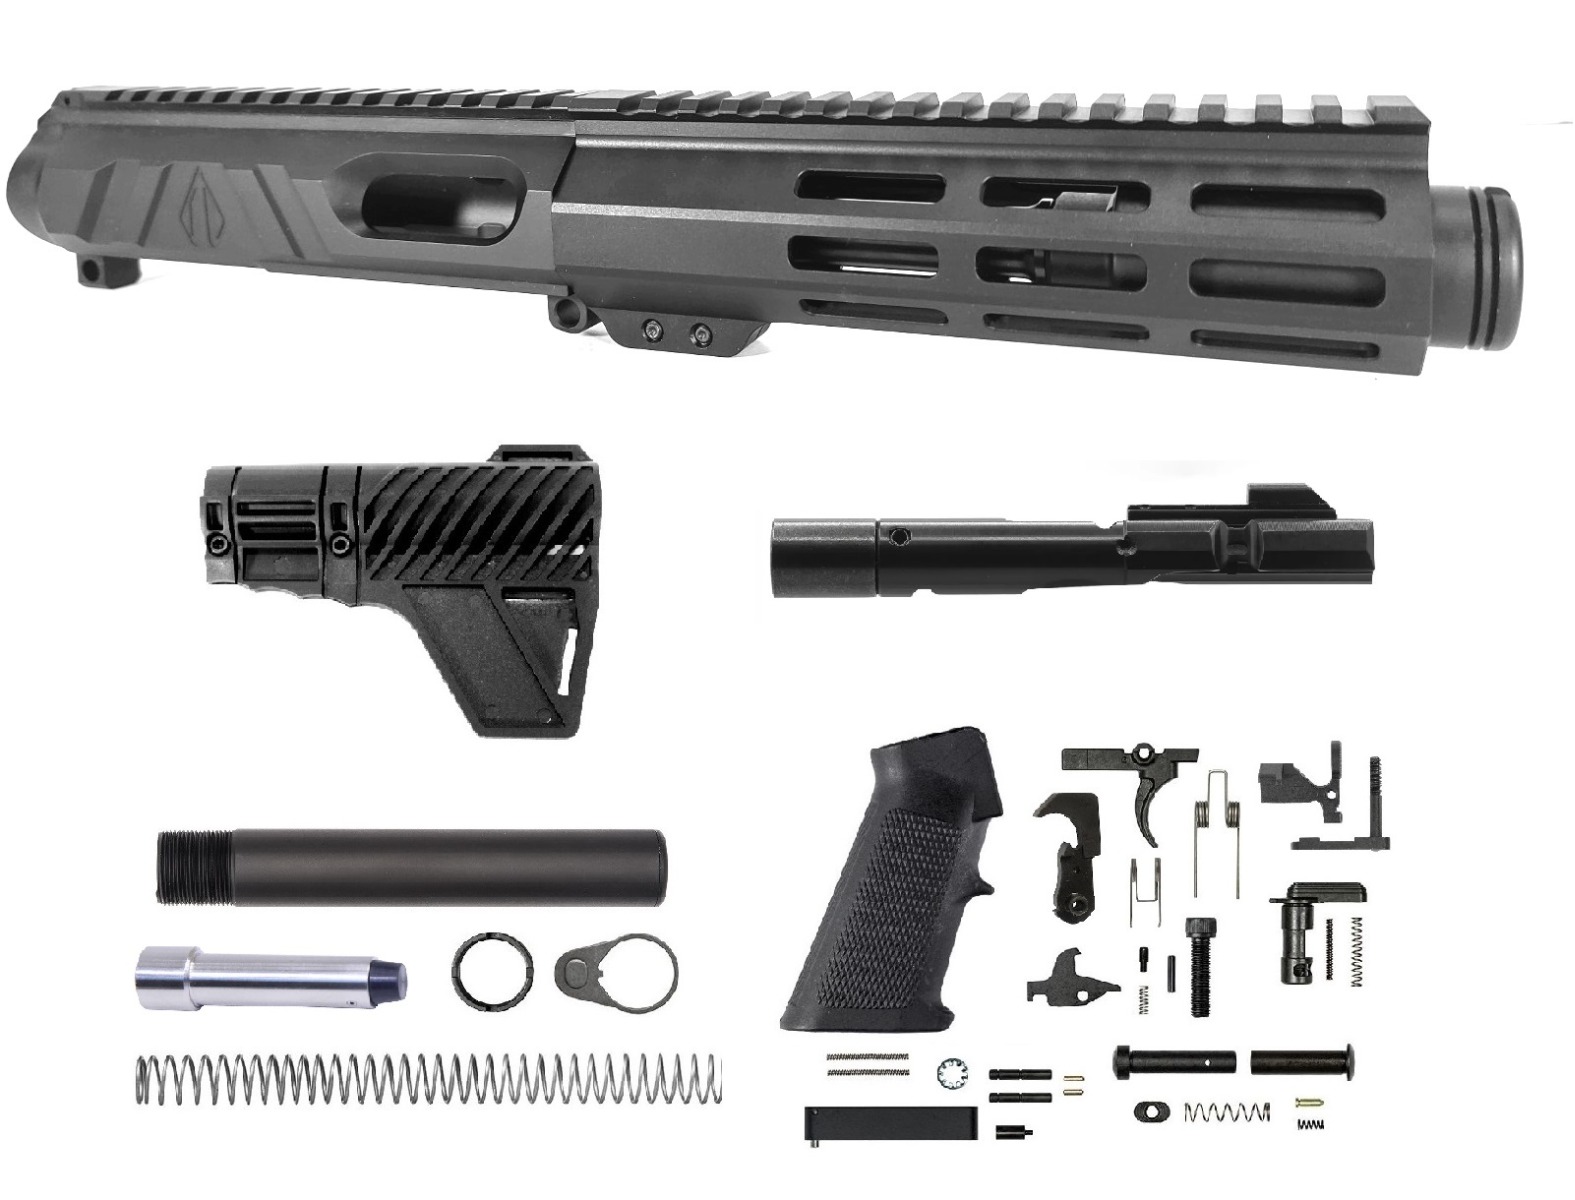 5.5" 40 S&W Side Charging Upper Kit | USA MADE